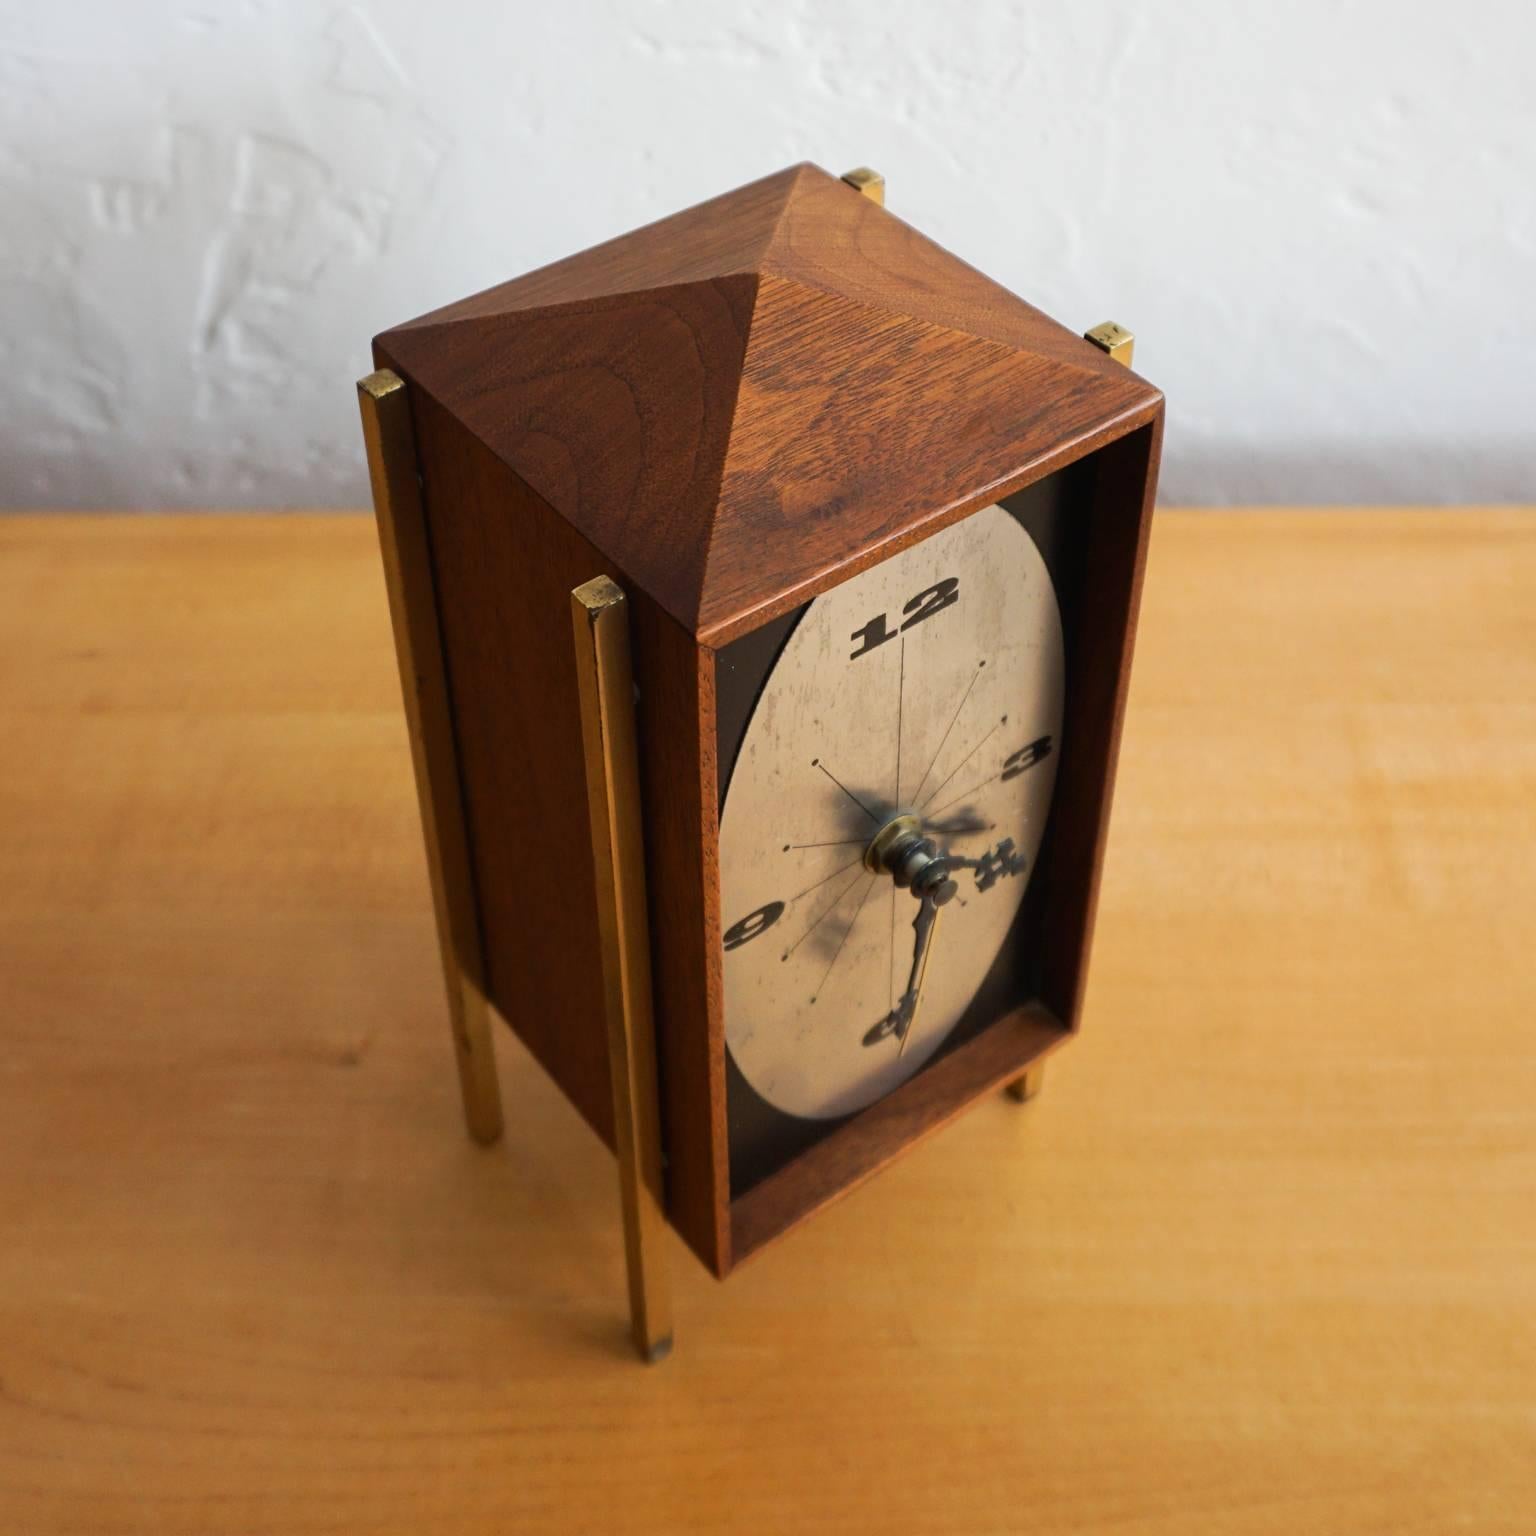 1960s walnut and brass table clock by Arthur Umanoff for George Nelson and Associates. Produced by Howard Miller. Battery operated.